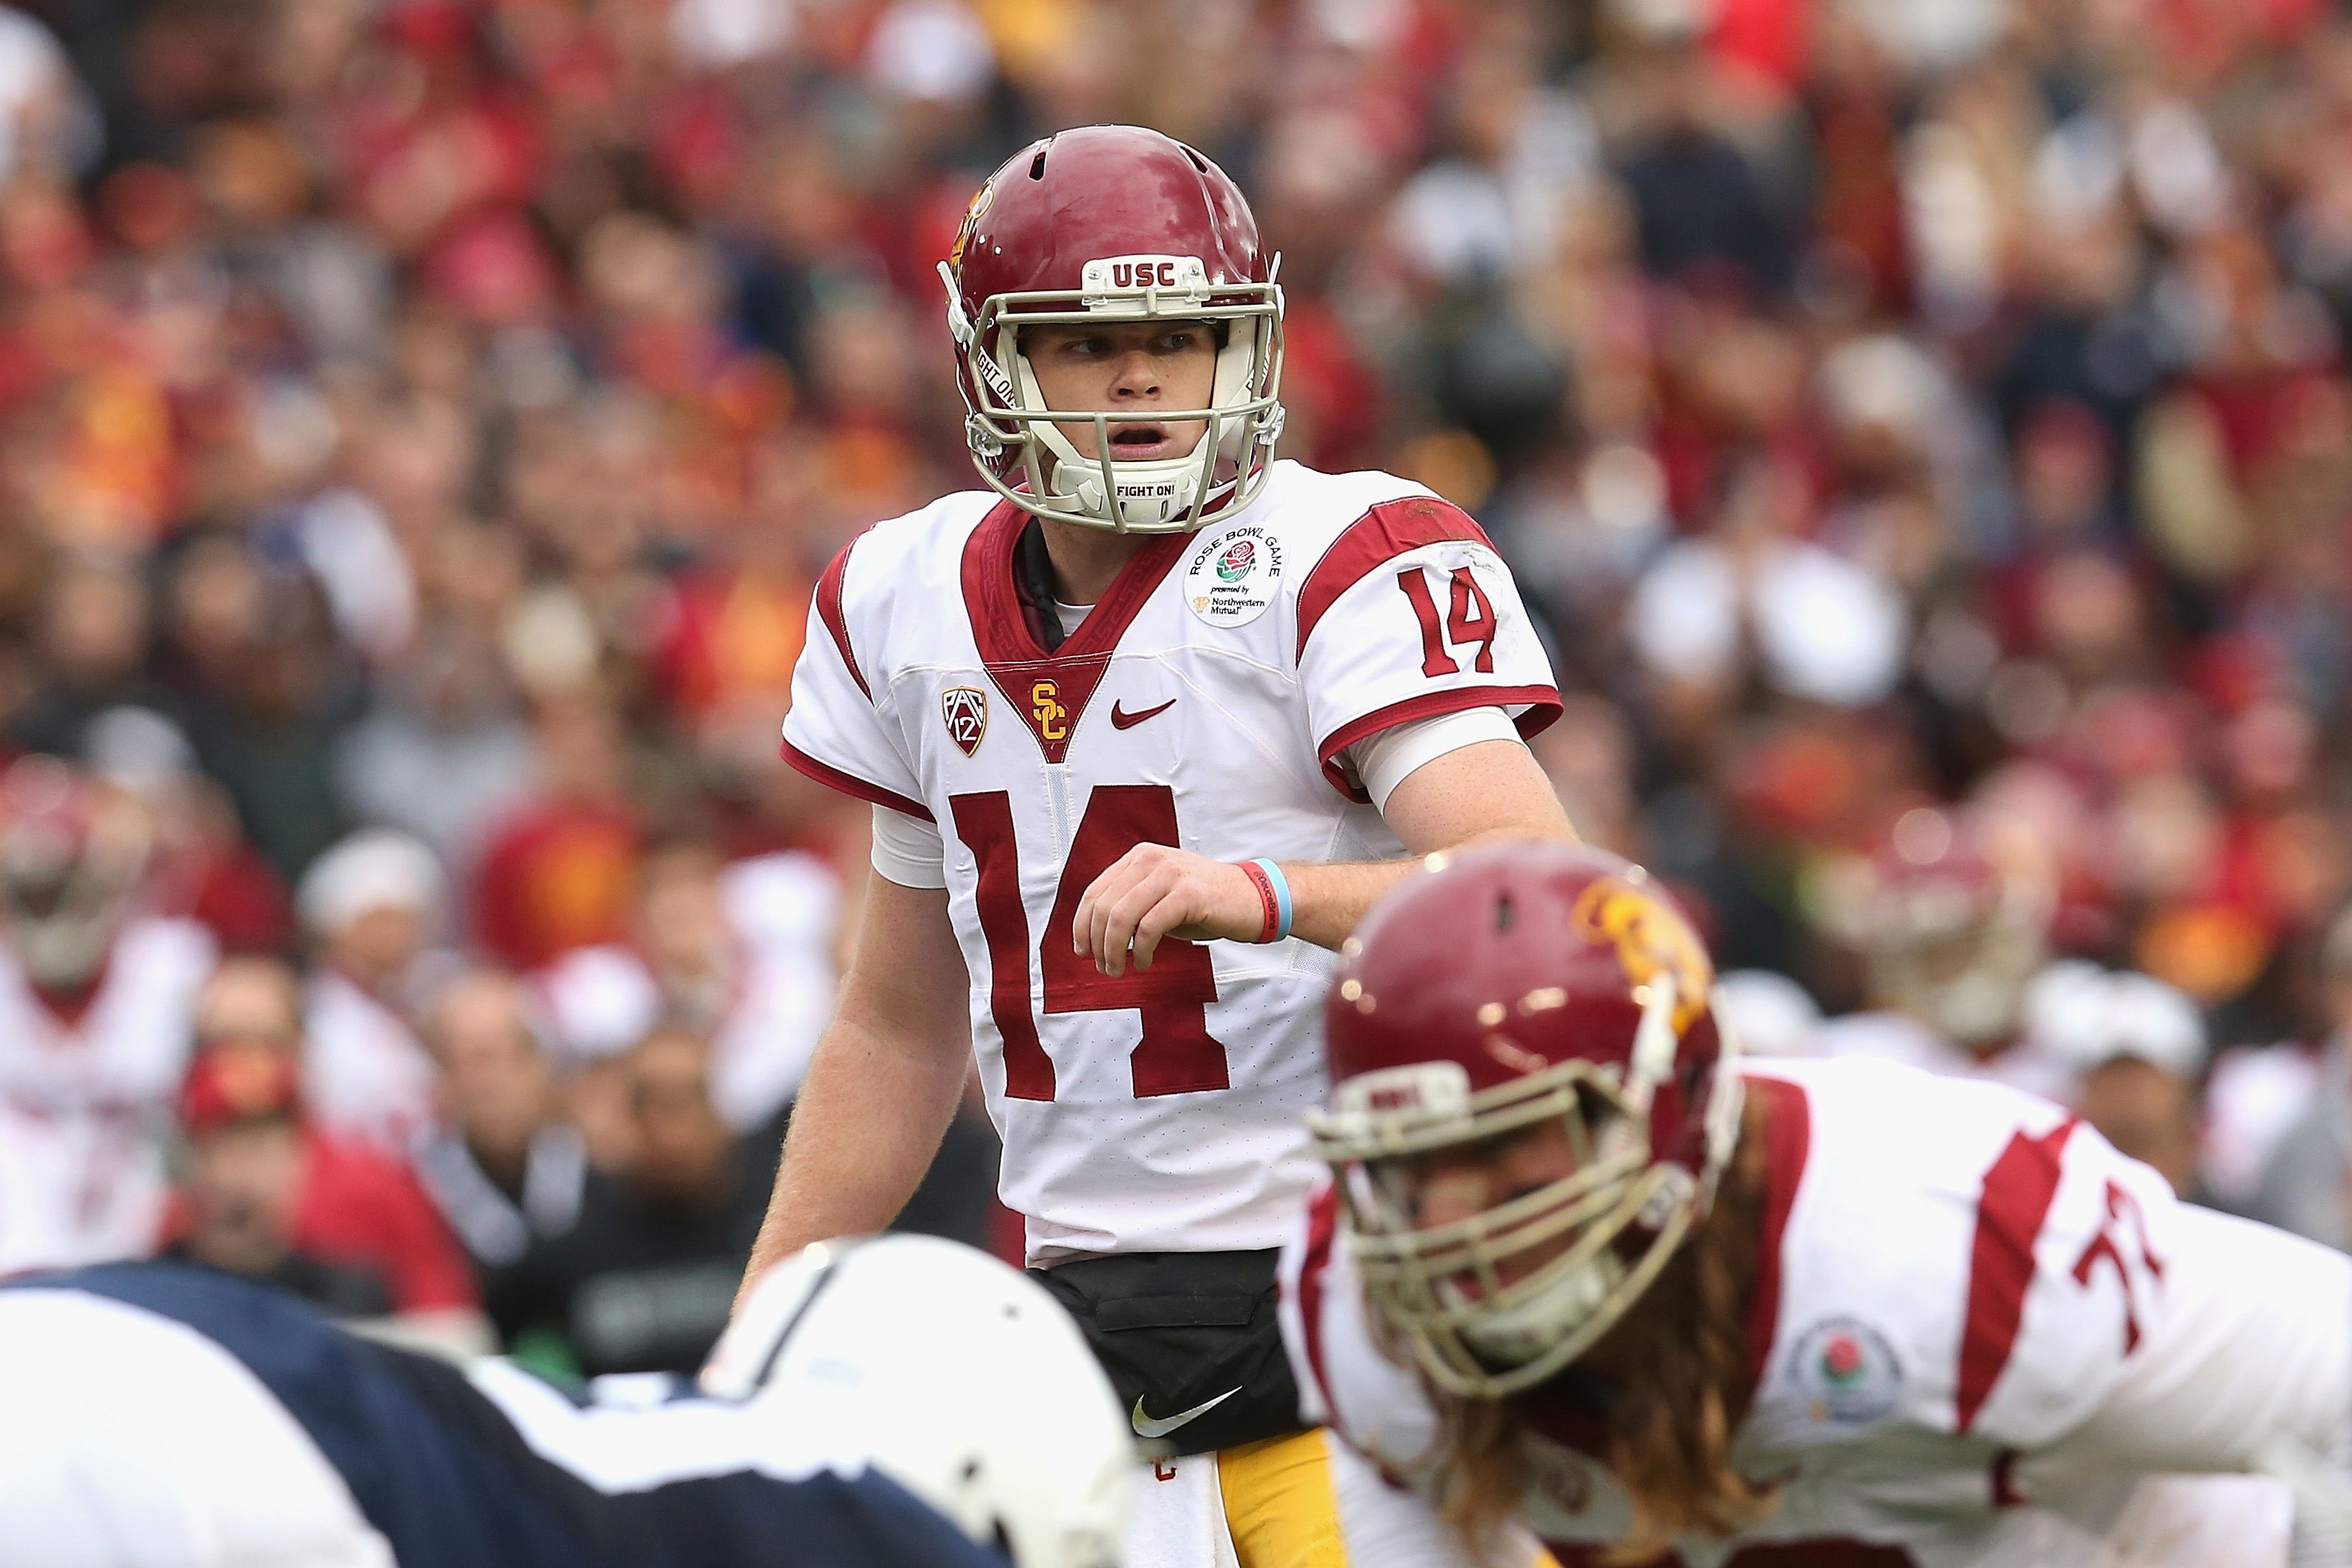 Ranking the 10 best USC quarterbacks of all-time